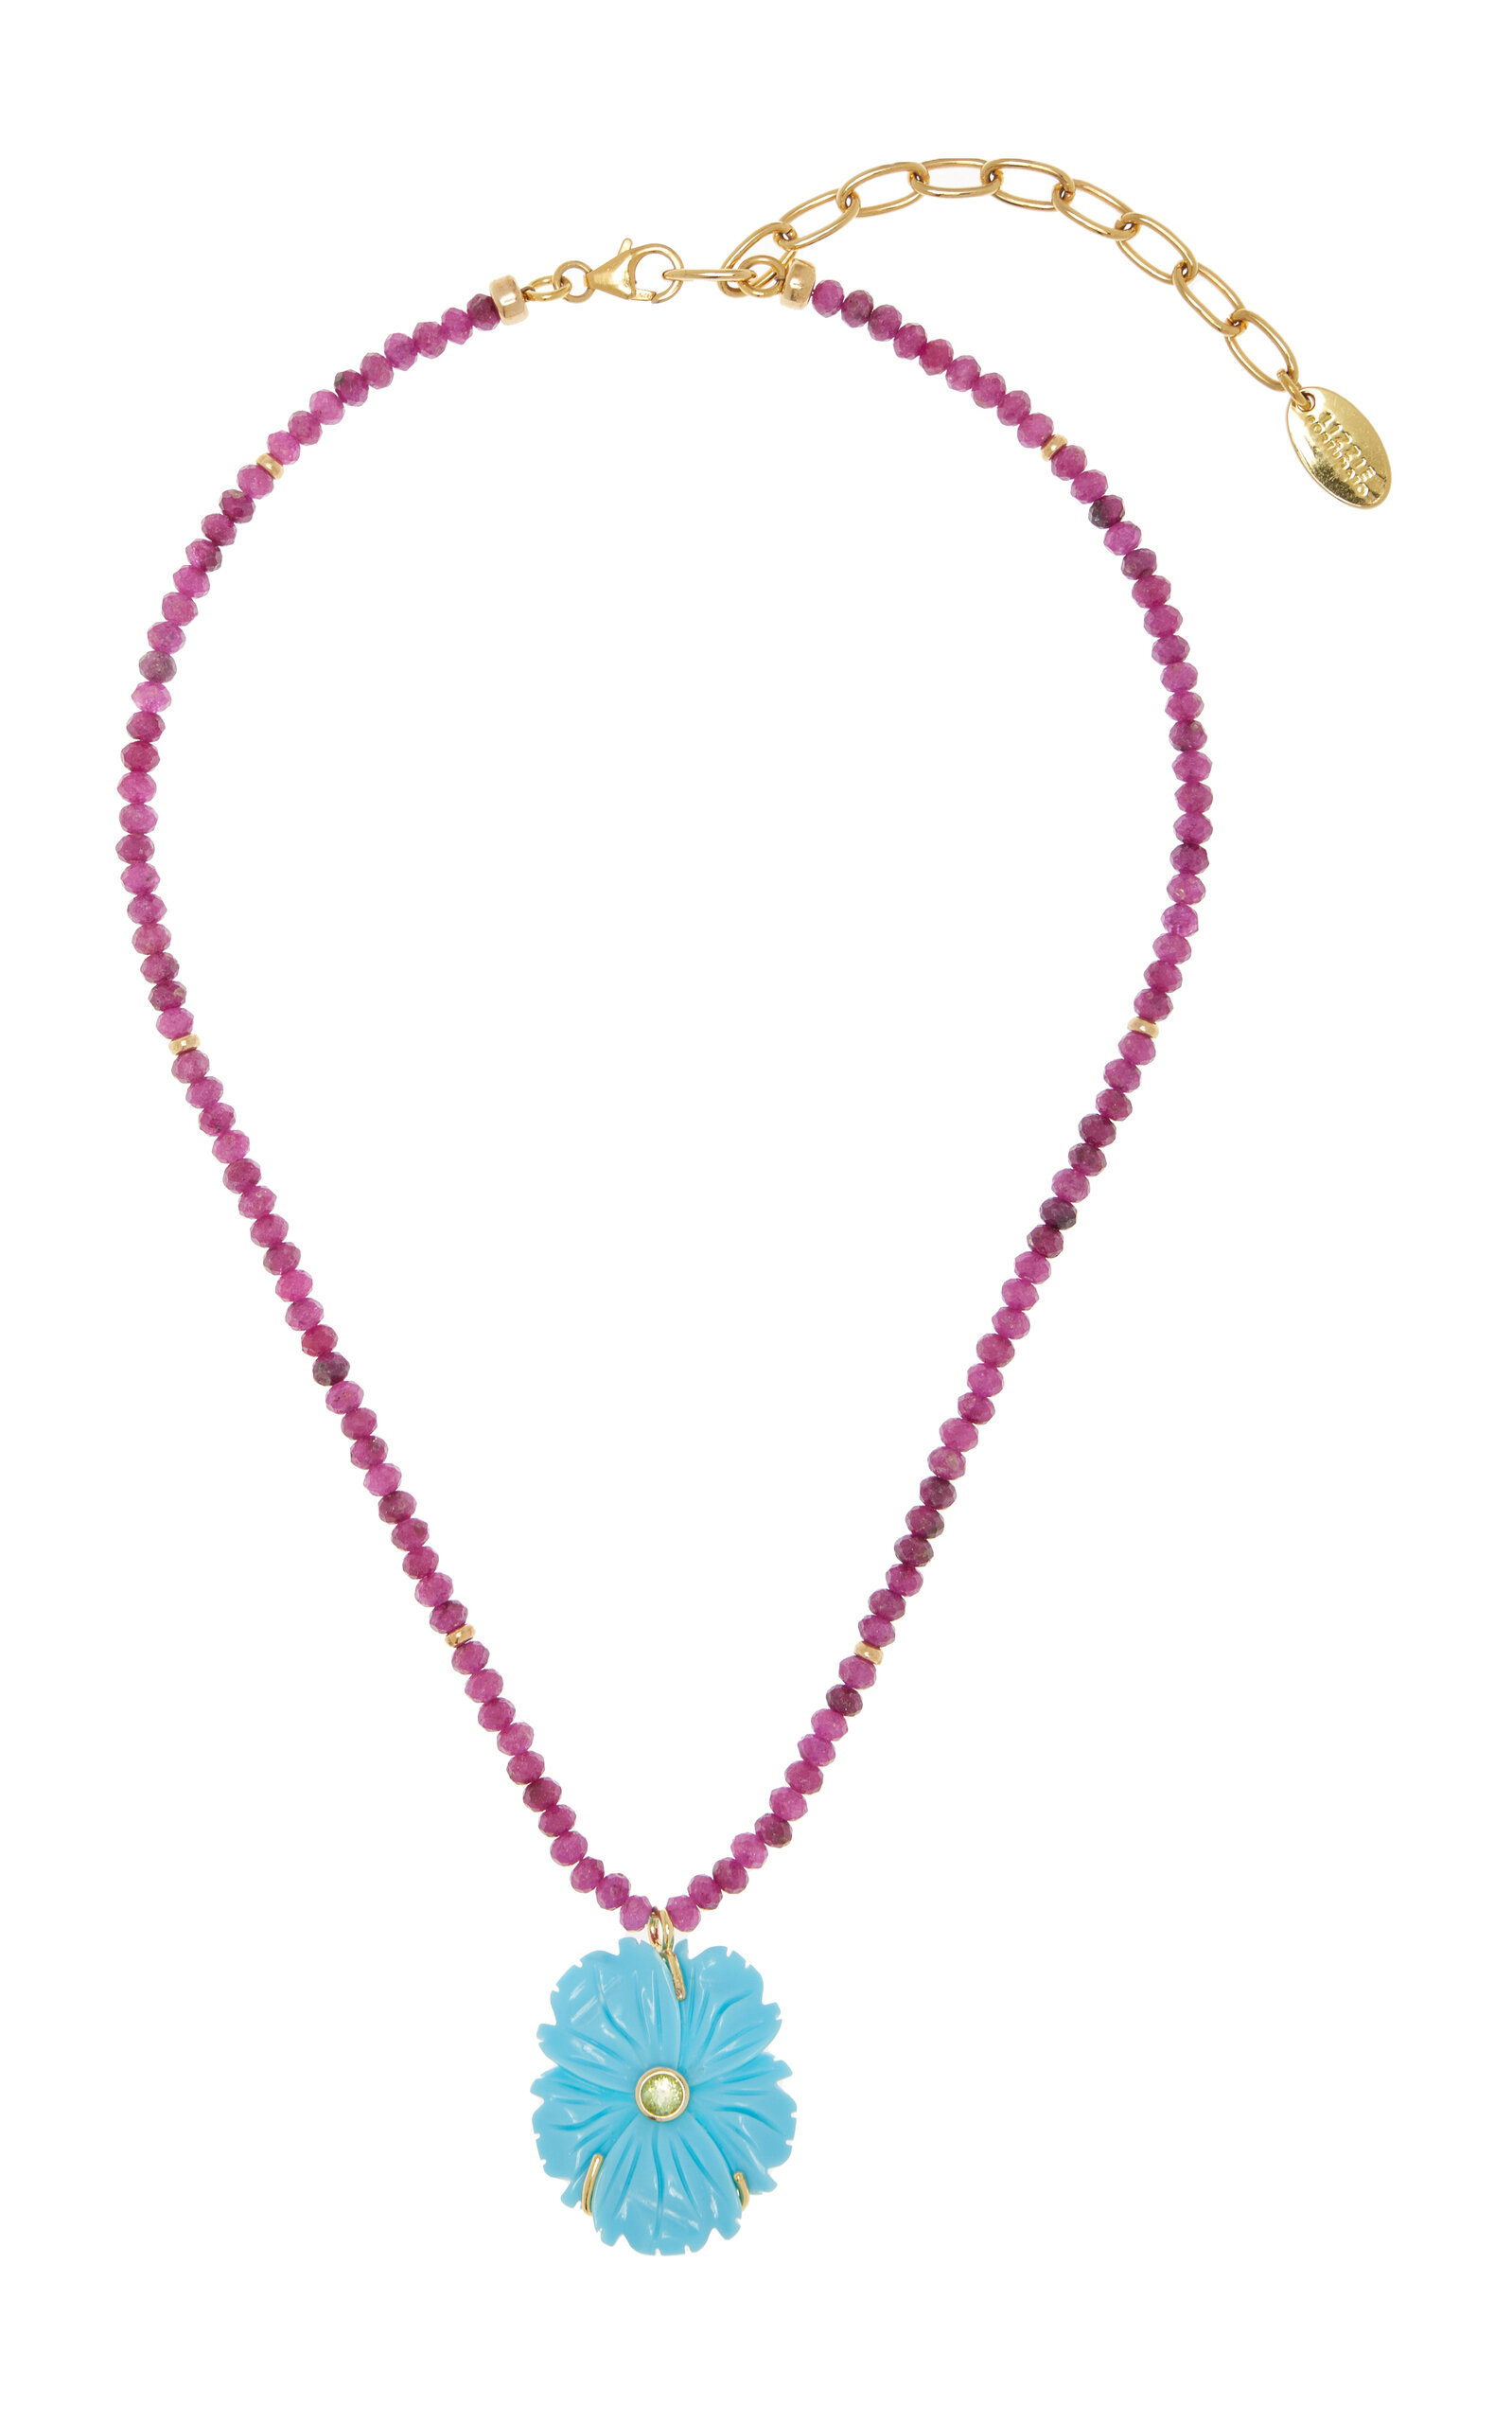 LIZZIE FORTUNATO NEW BLOOM BEADED TURQUOISE NECKLACE